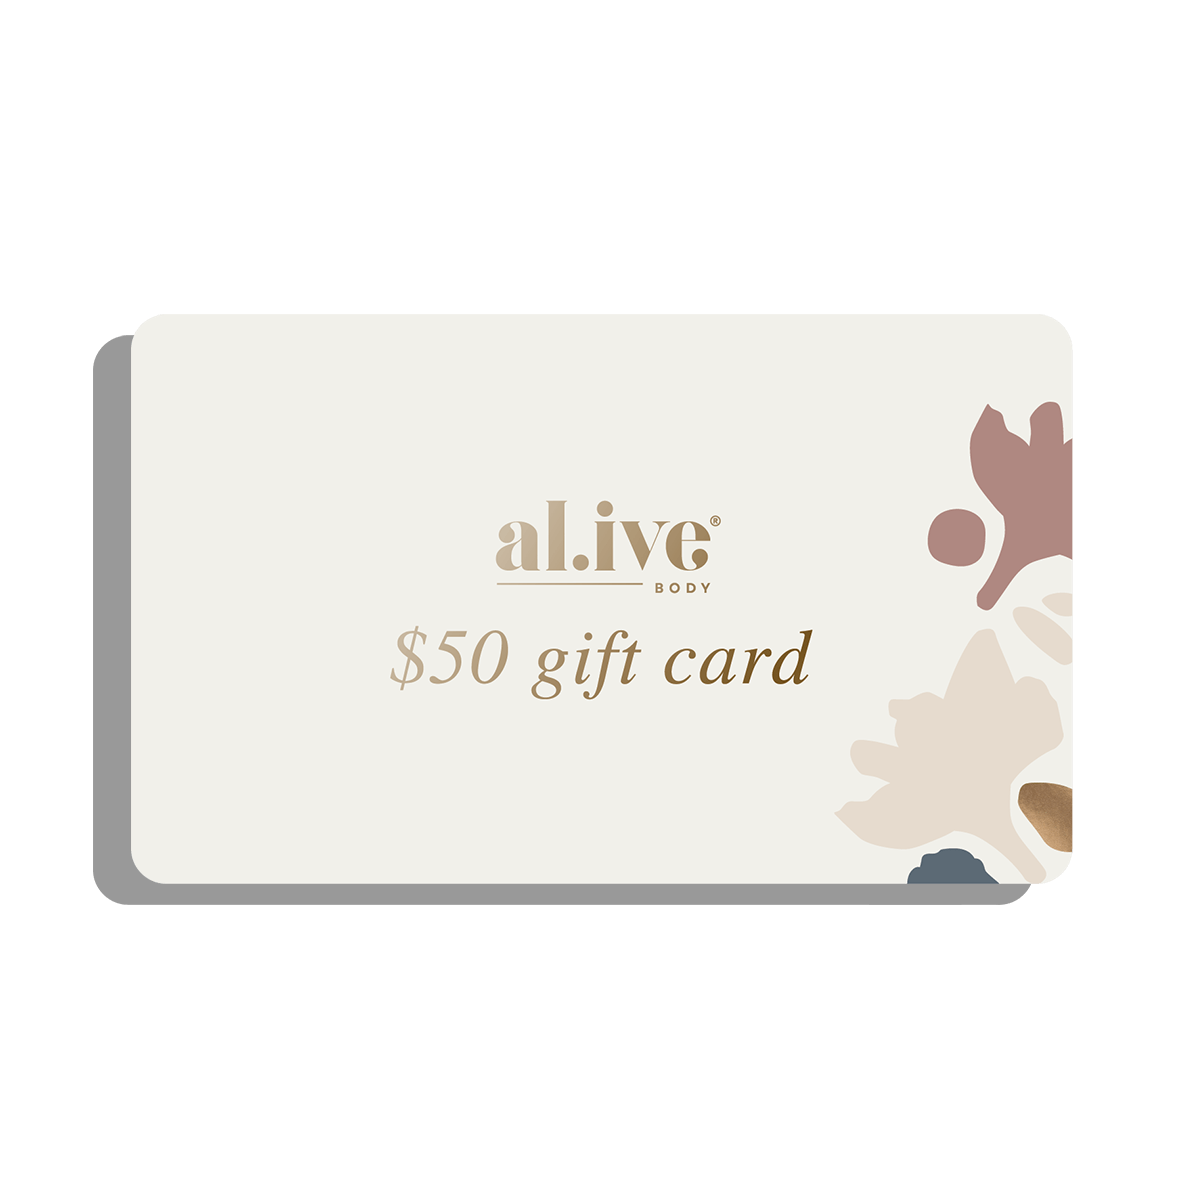 $50 HOLIDAY GIFT CARD - al.ive body